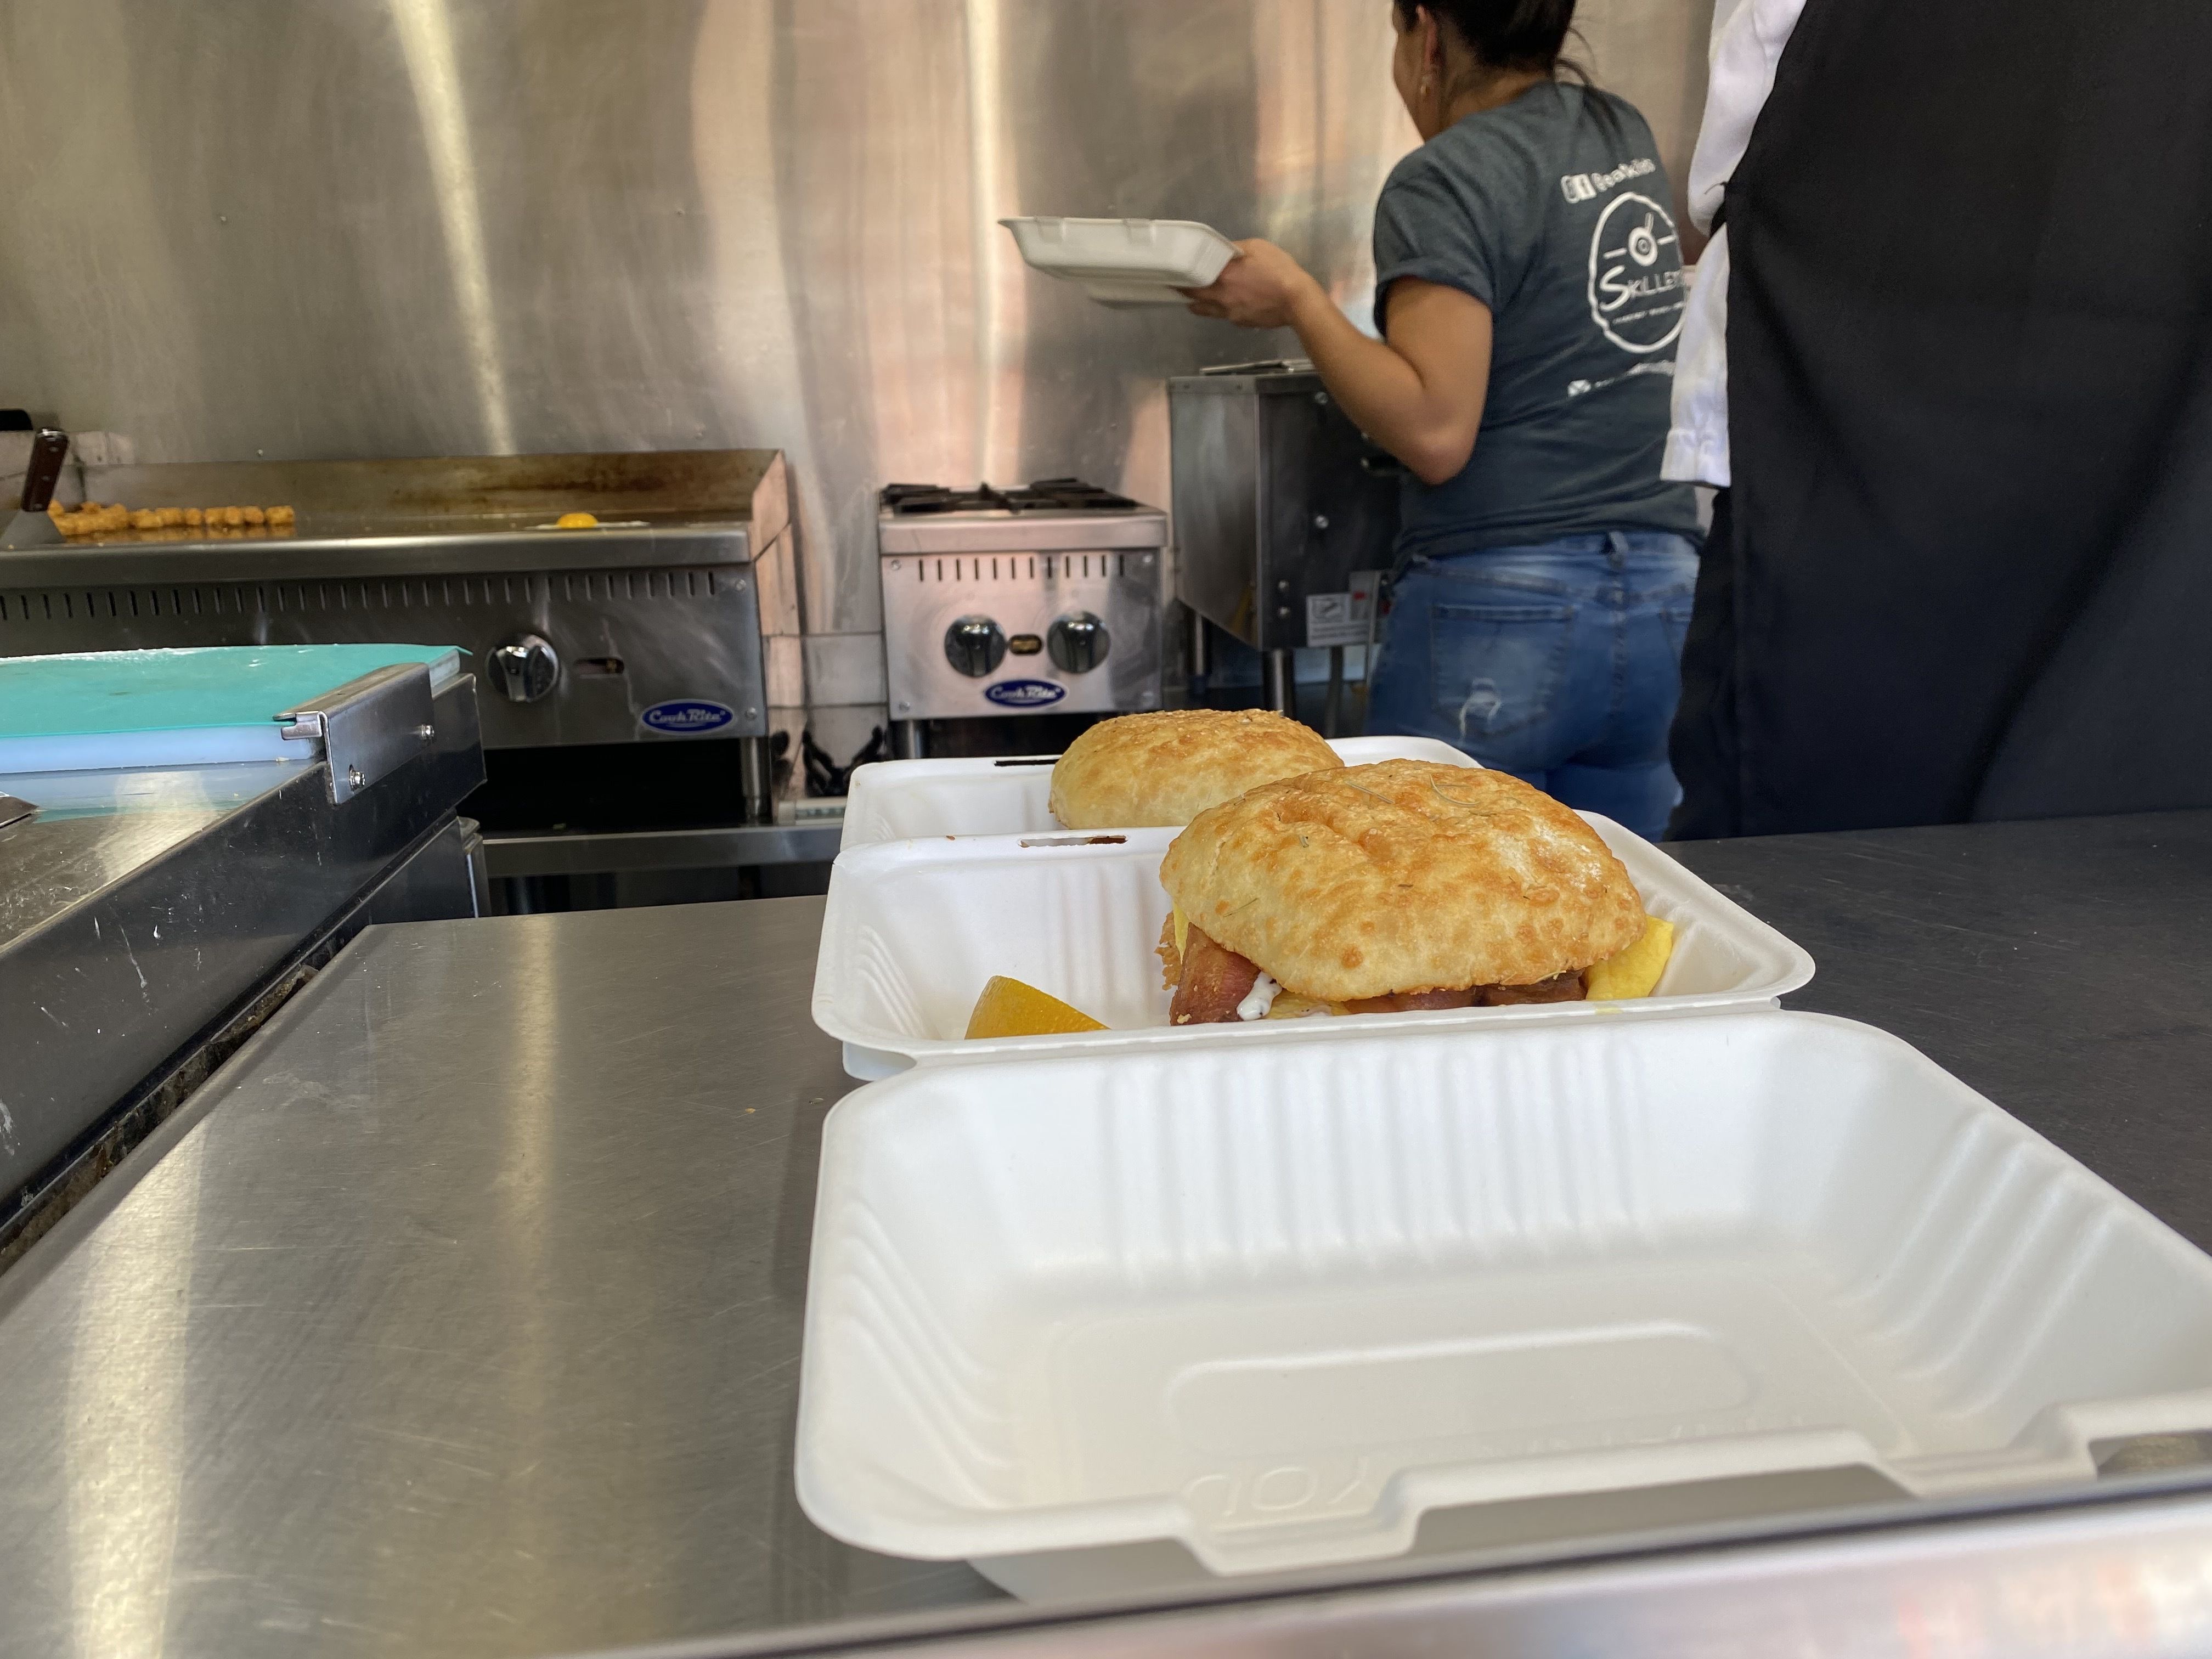 A sandwich from a food truck